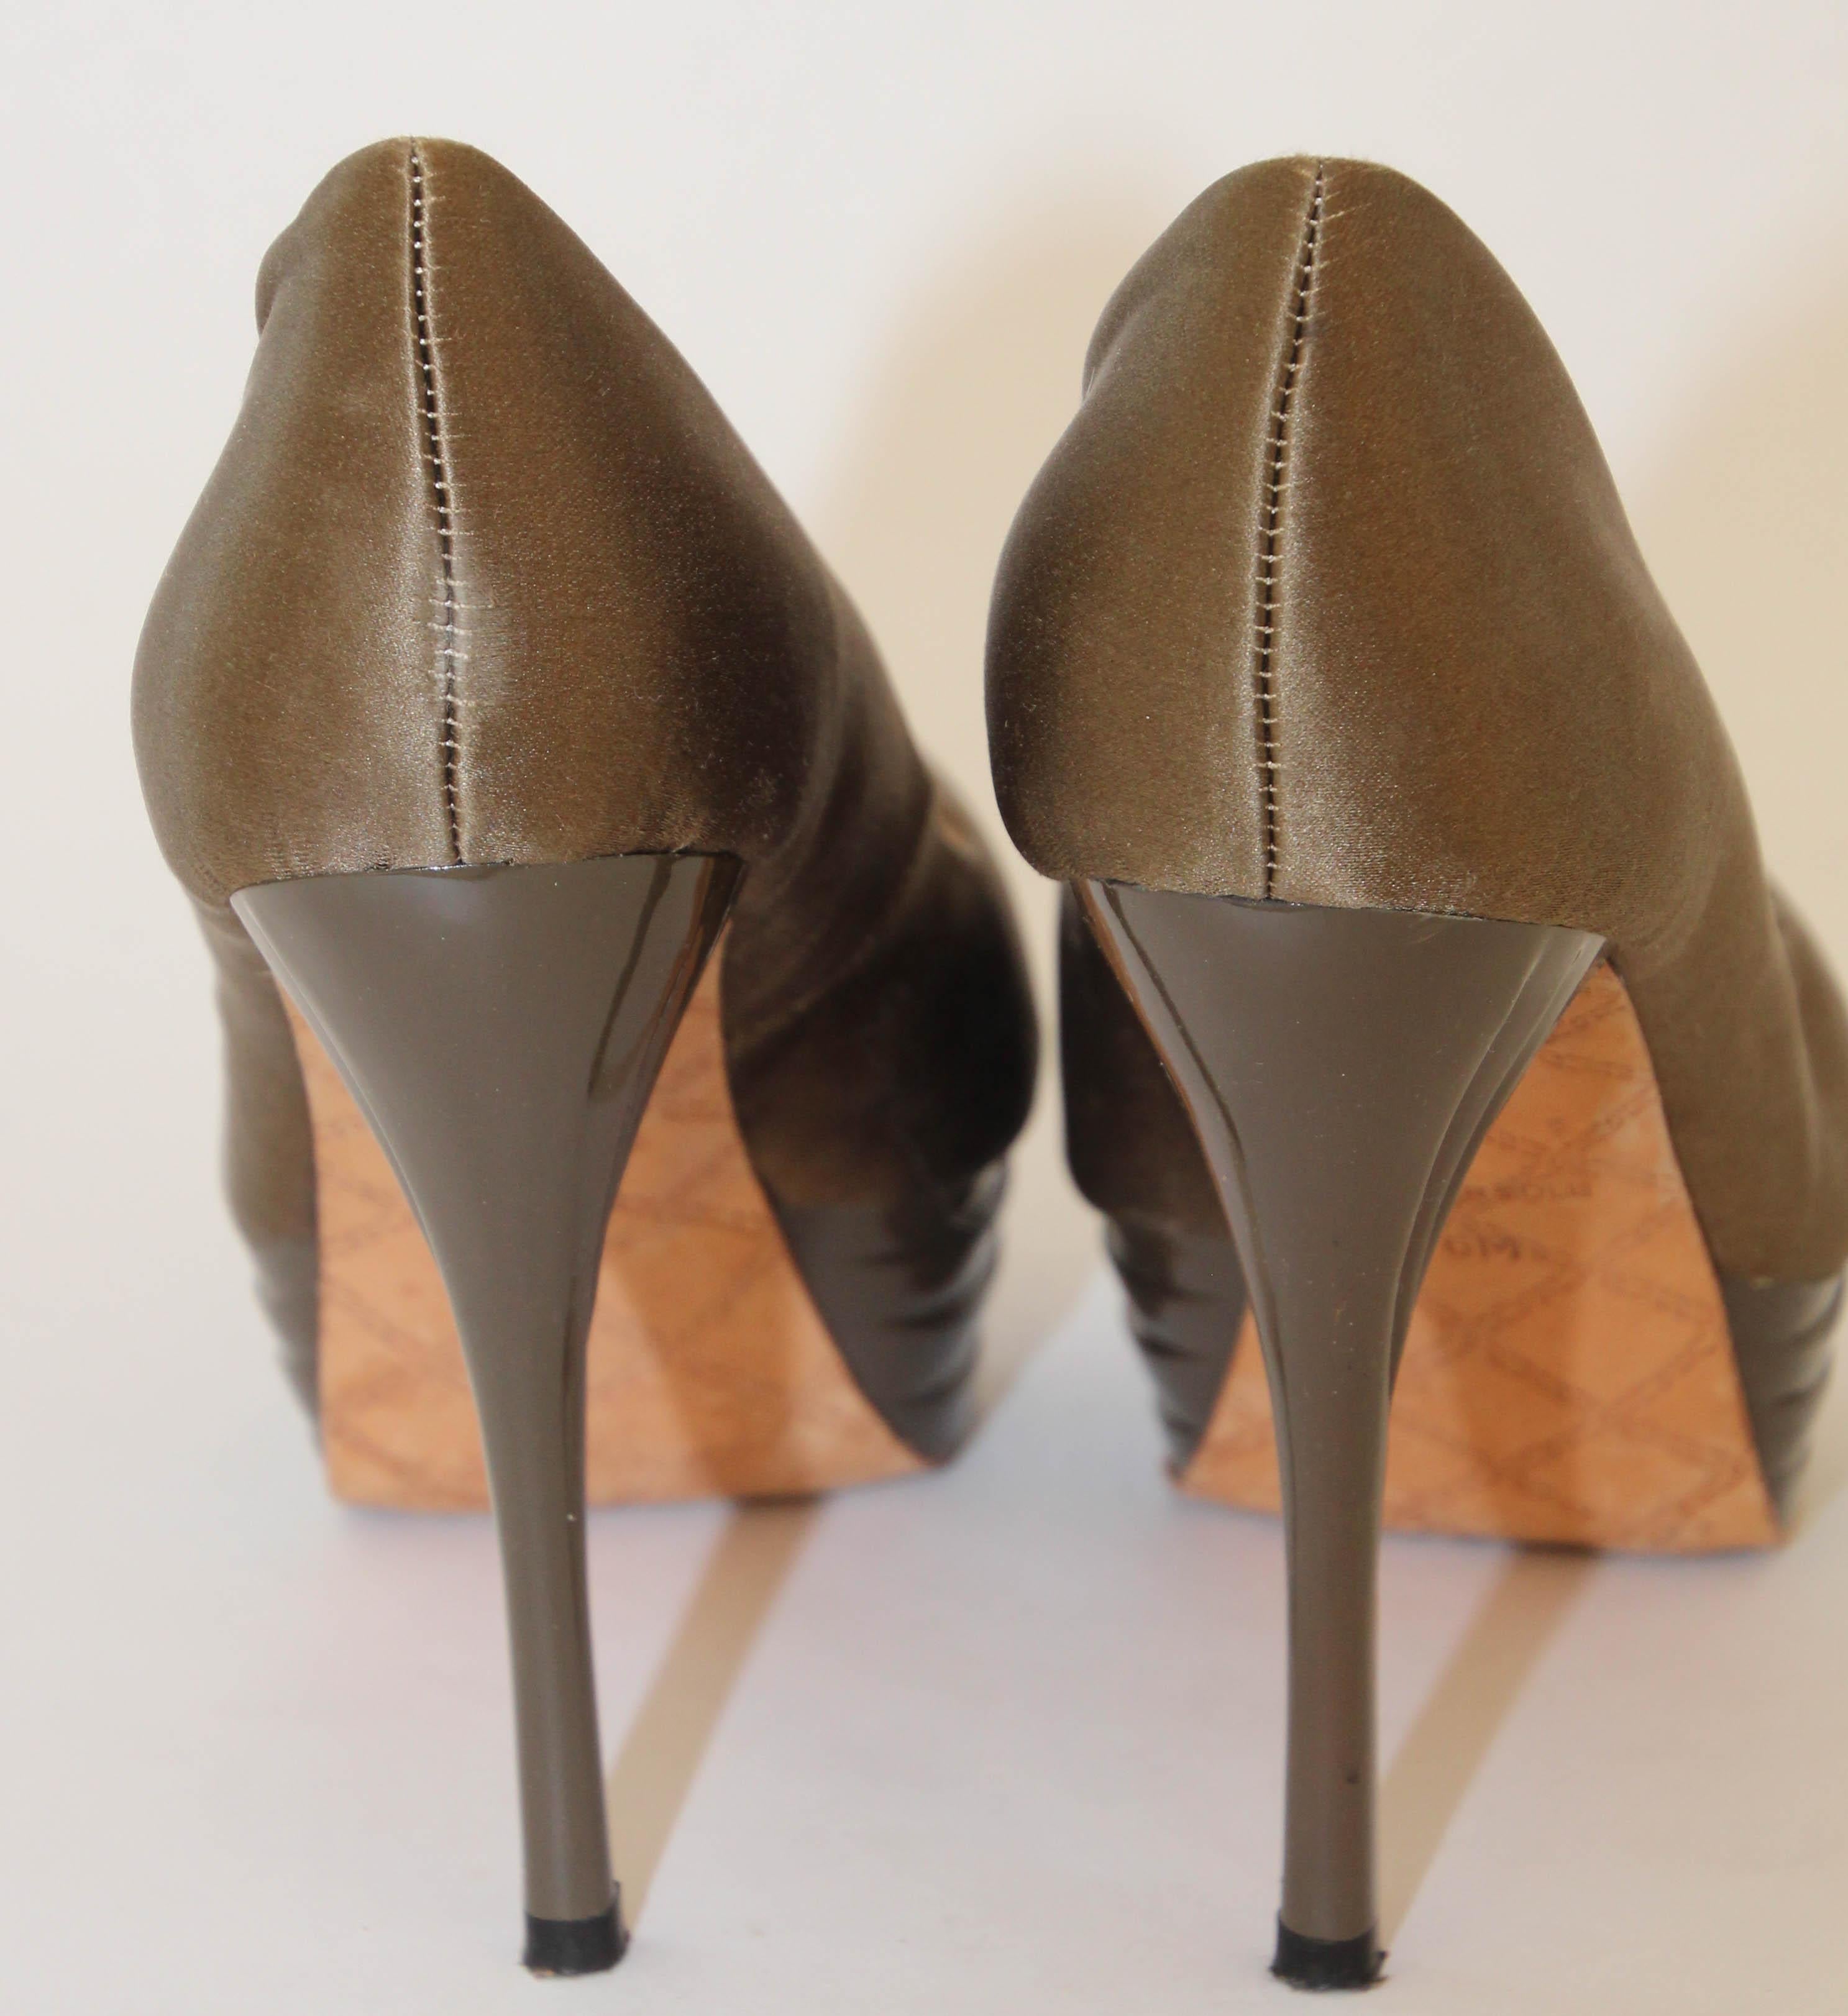 L.A.M.B. LAMB Z-Project Satin and Lacquer Dark Taupe Platform Heels 6 M For Sale 2